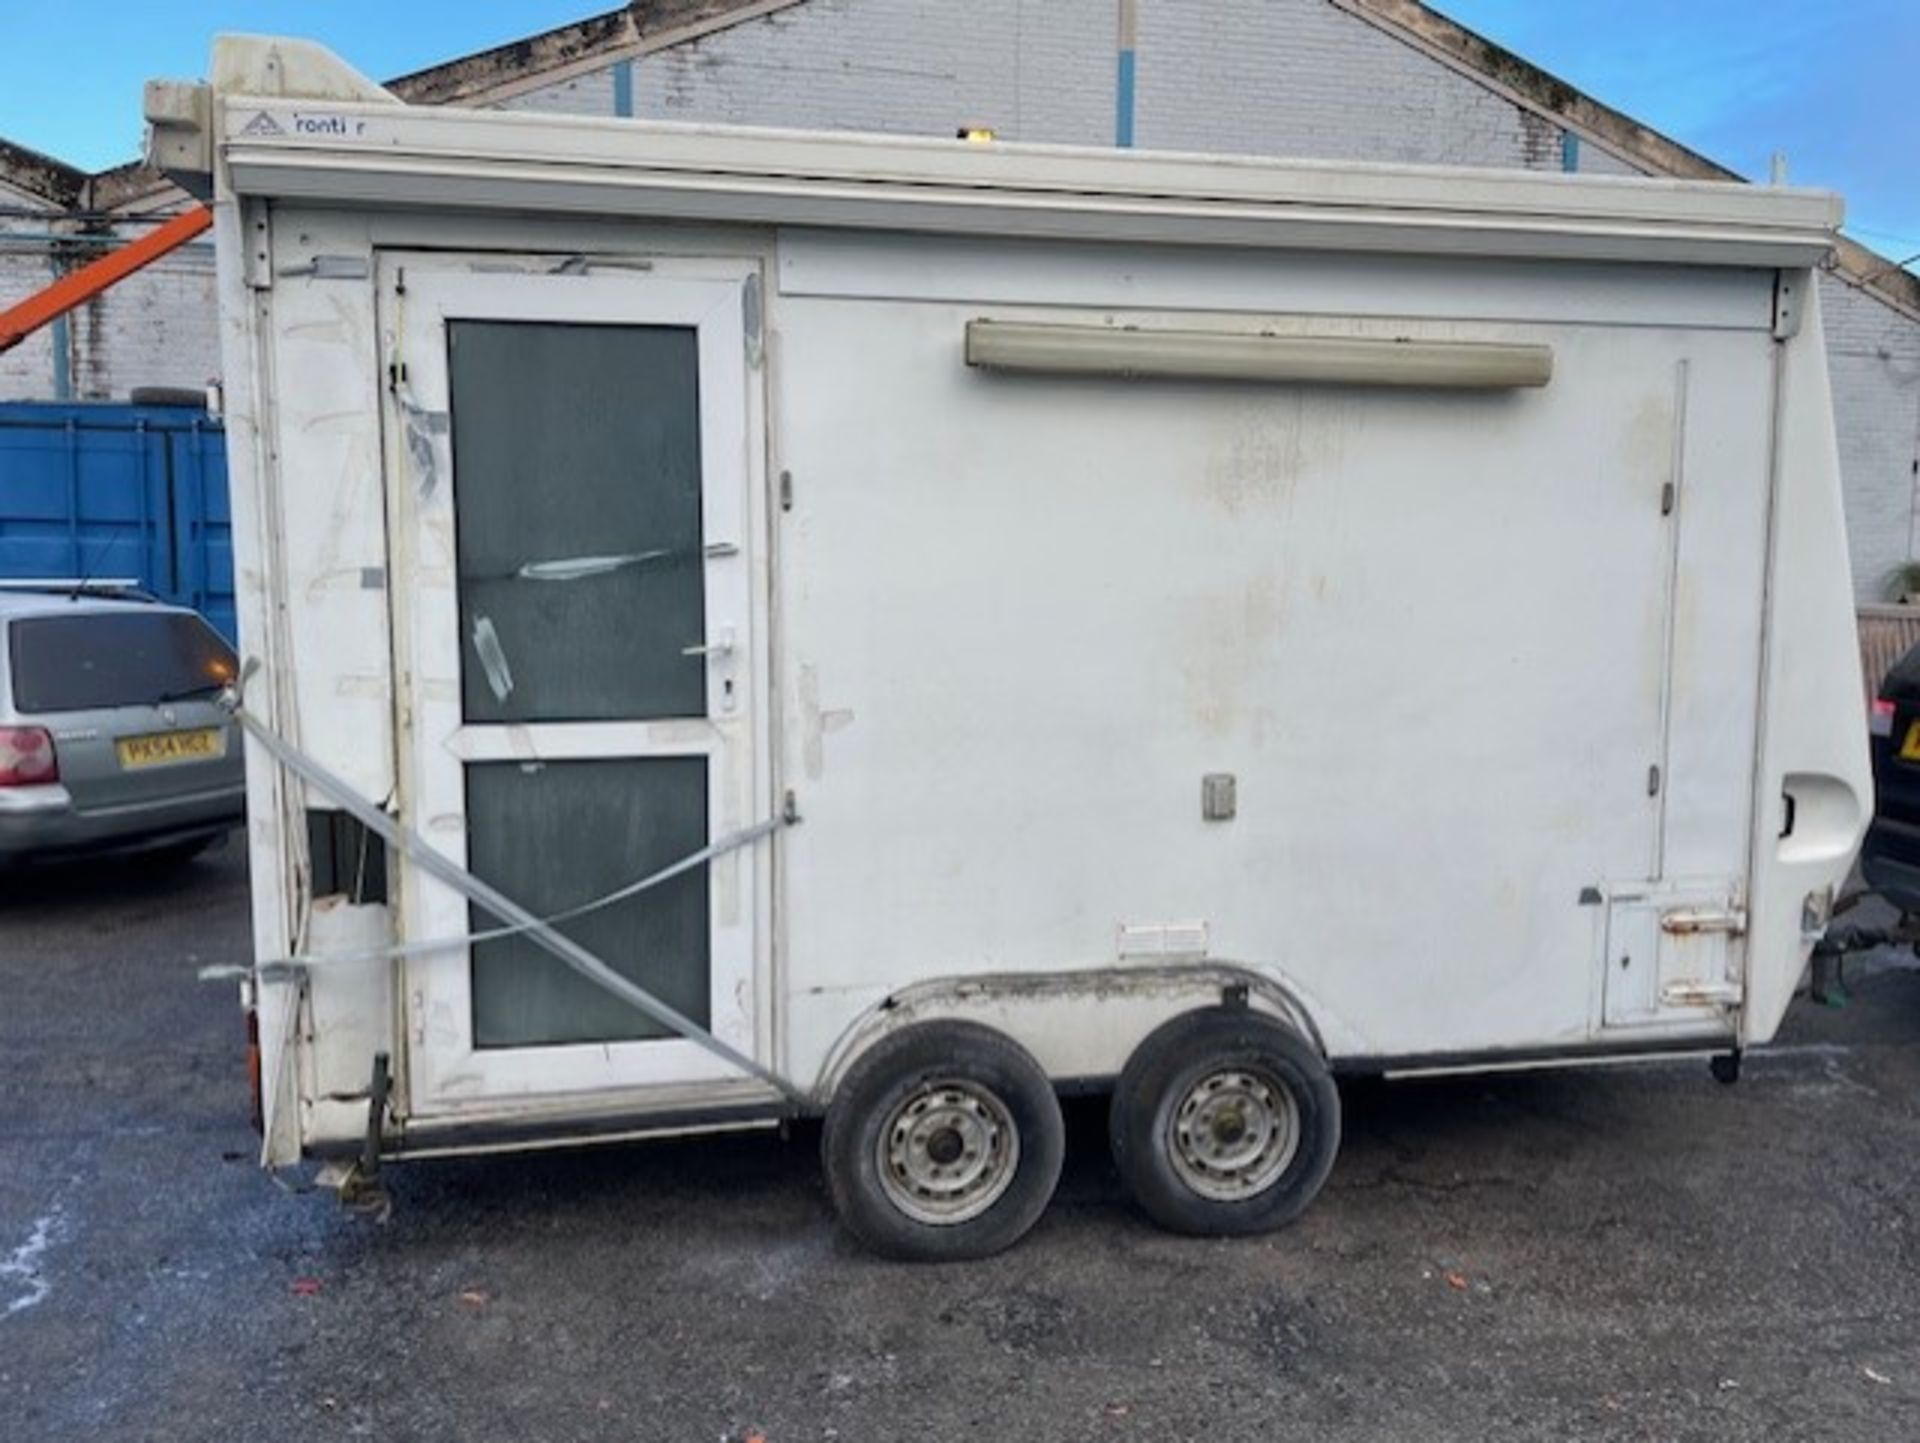 Trailer that was used for shows come complete with three awnings tows lights but needs a tad